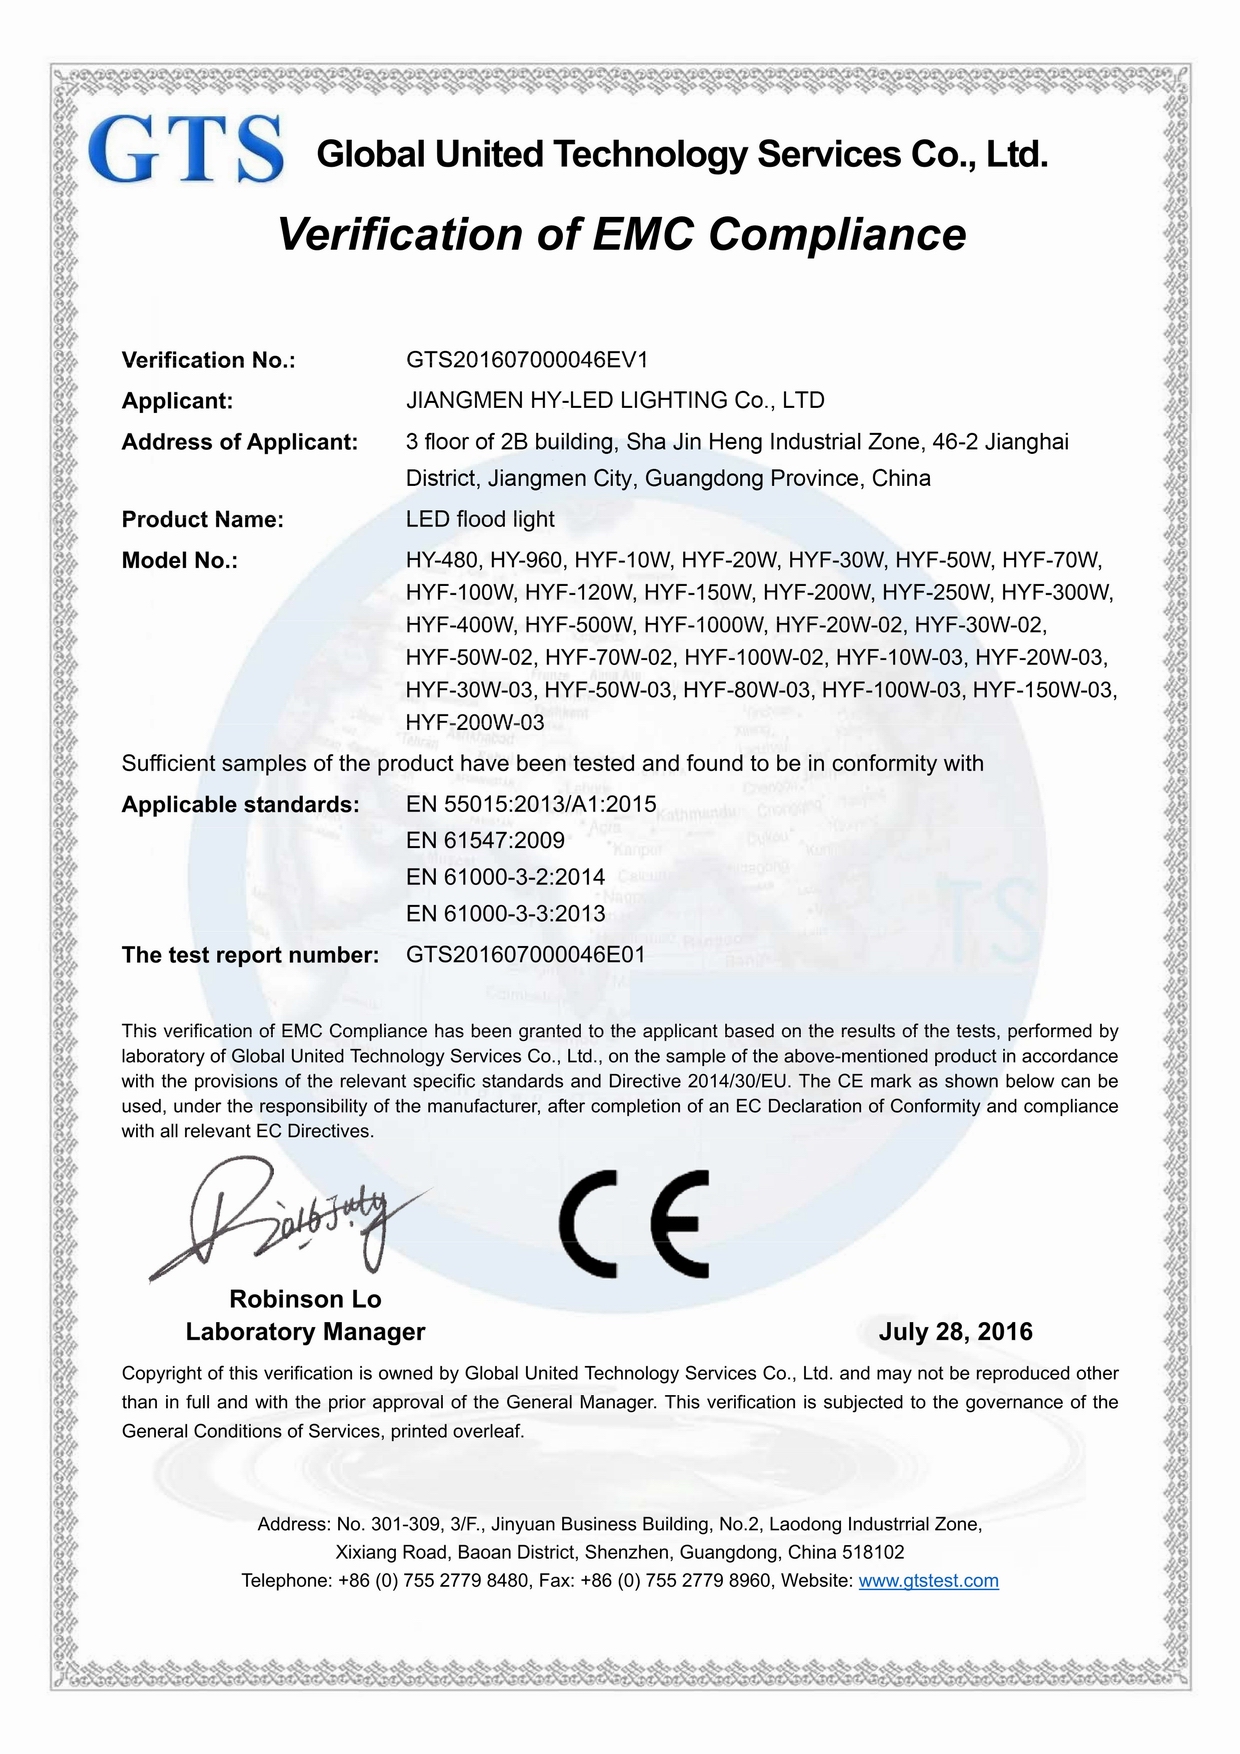 Products Certificate